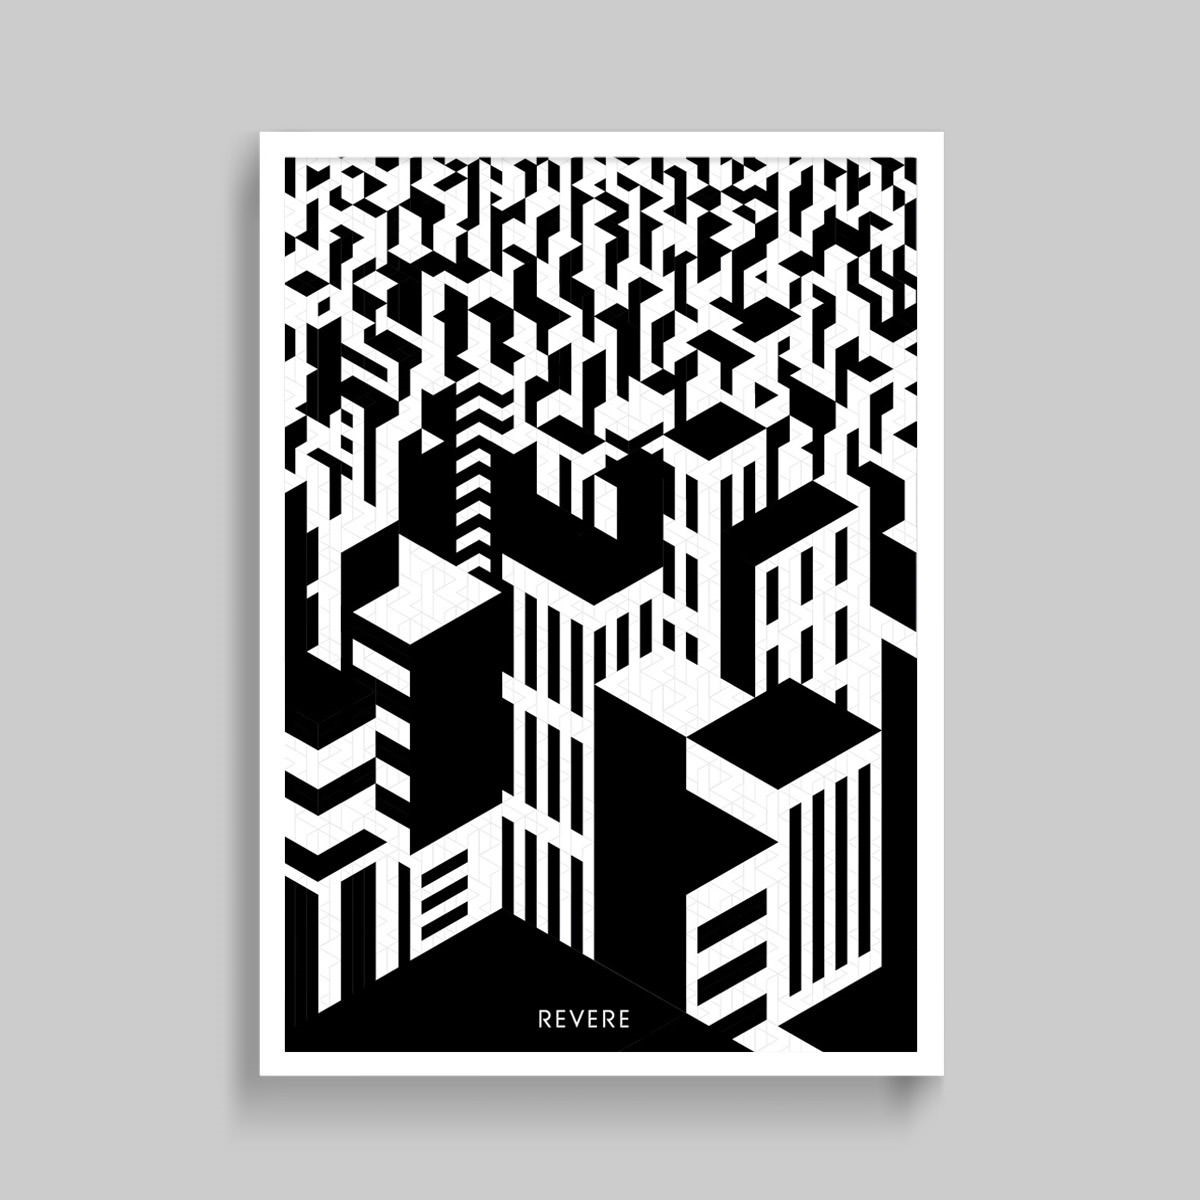 Revere. Pattern cityscape poster mock-up. Brand identity design by Superfried. Manchester.